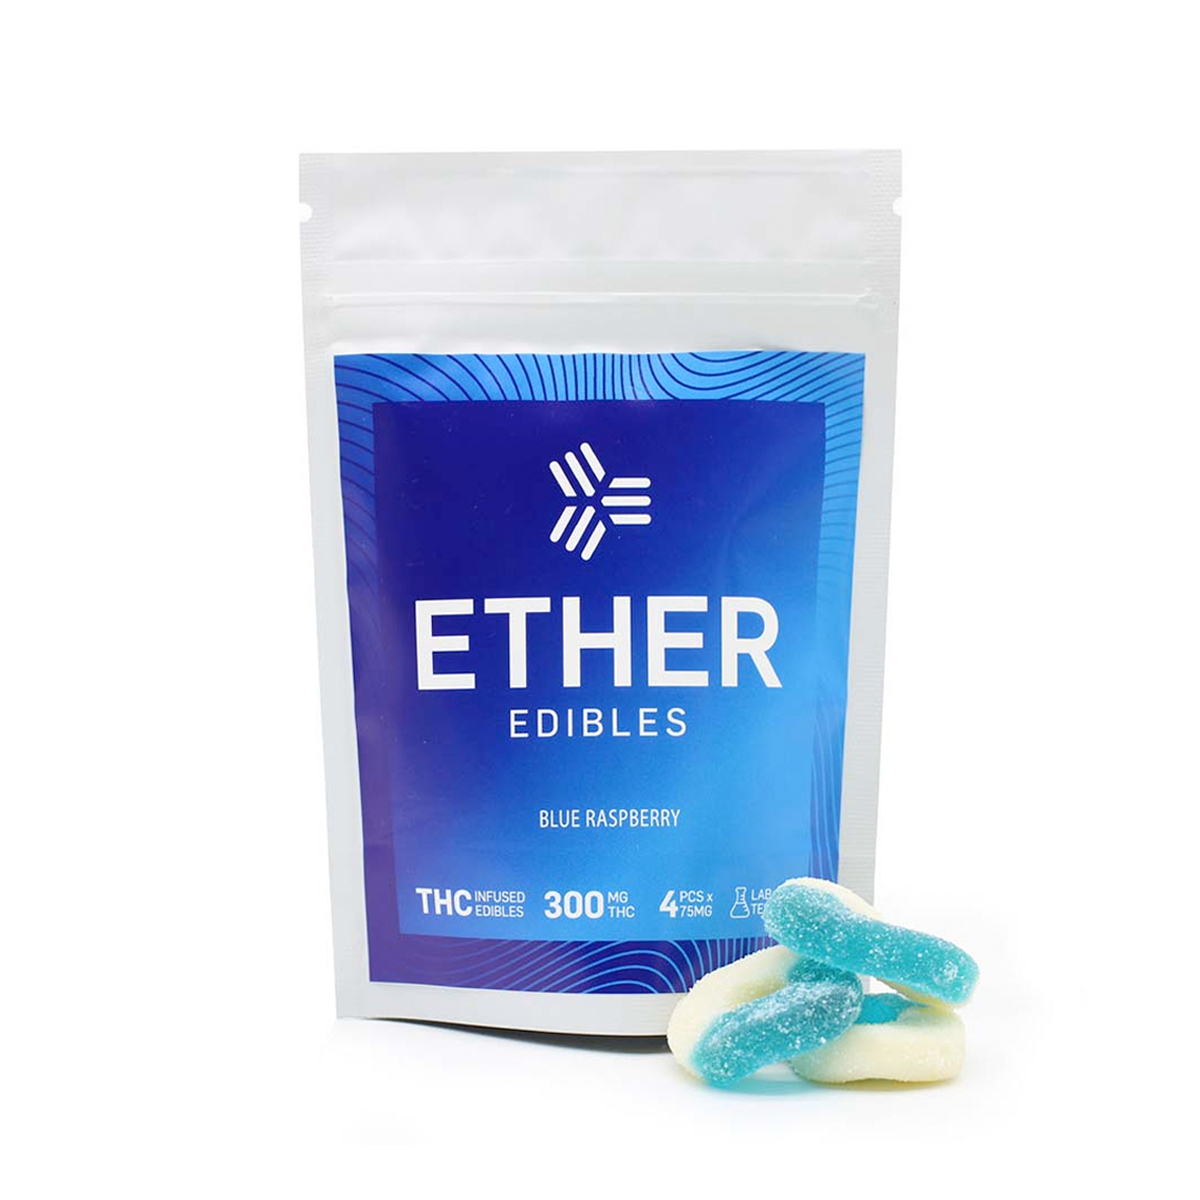 Buy Ether Edibles Blue Raspberry 300mg Online